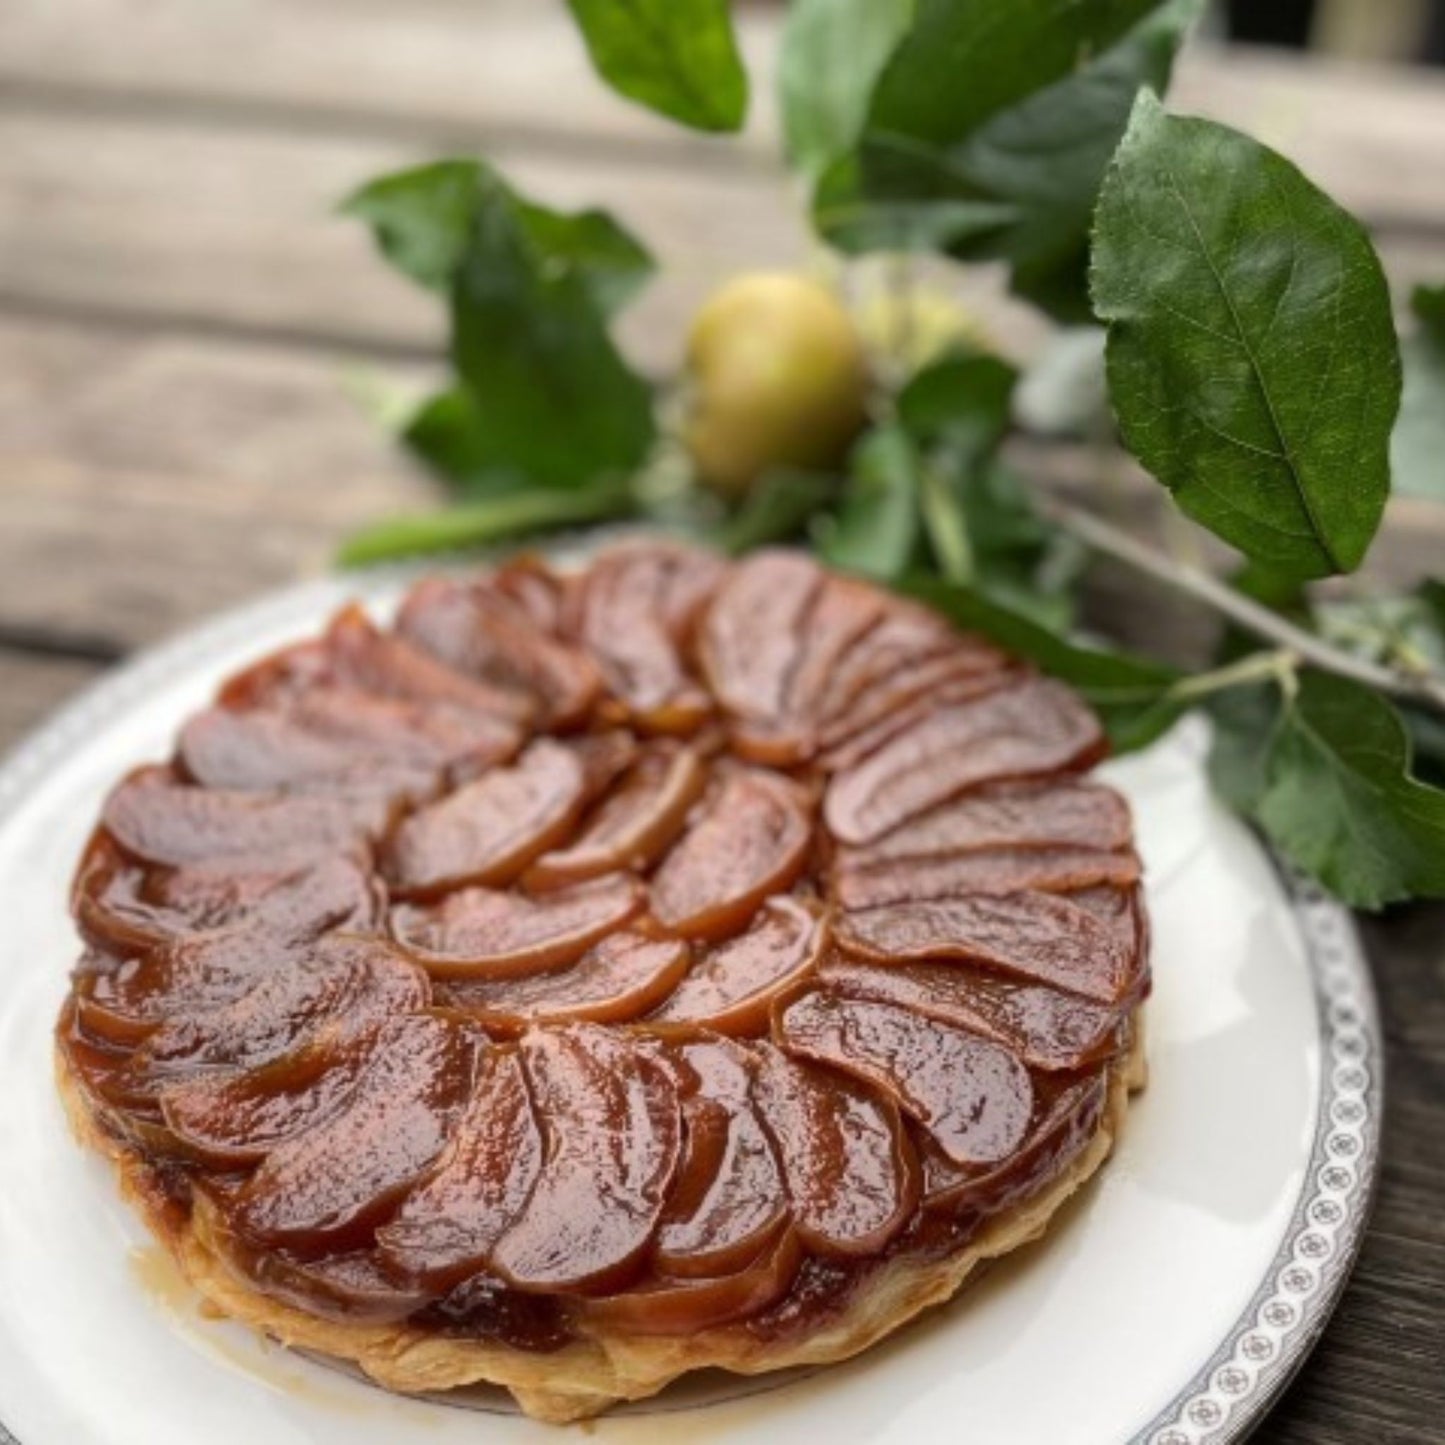 Apple tarte tartin on a white plate with a branch of apple tree